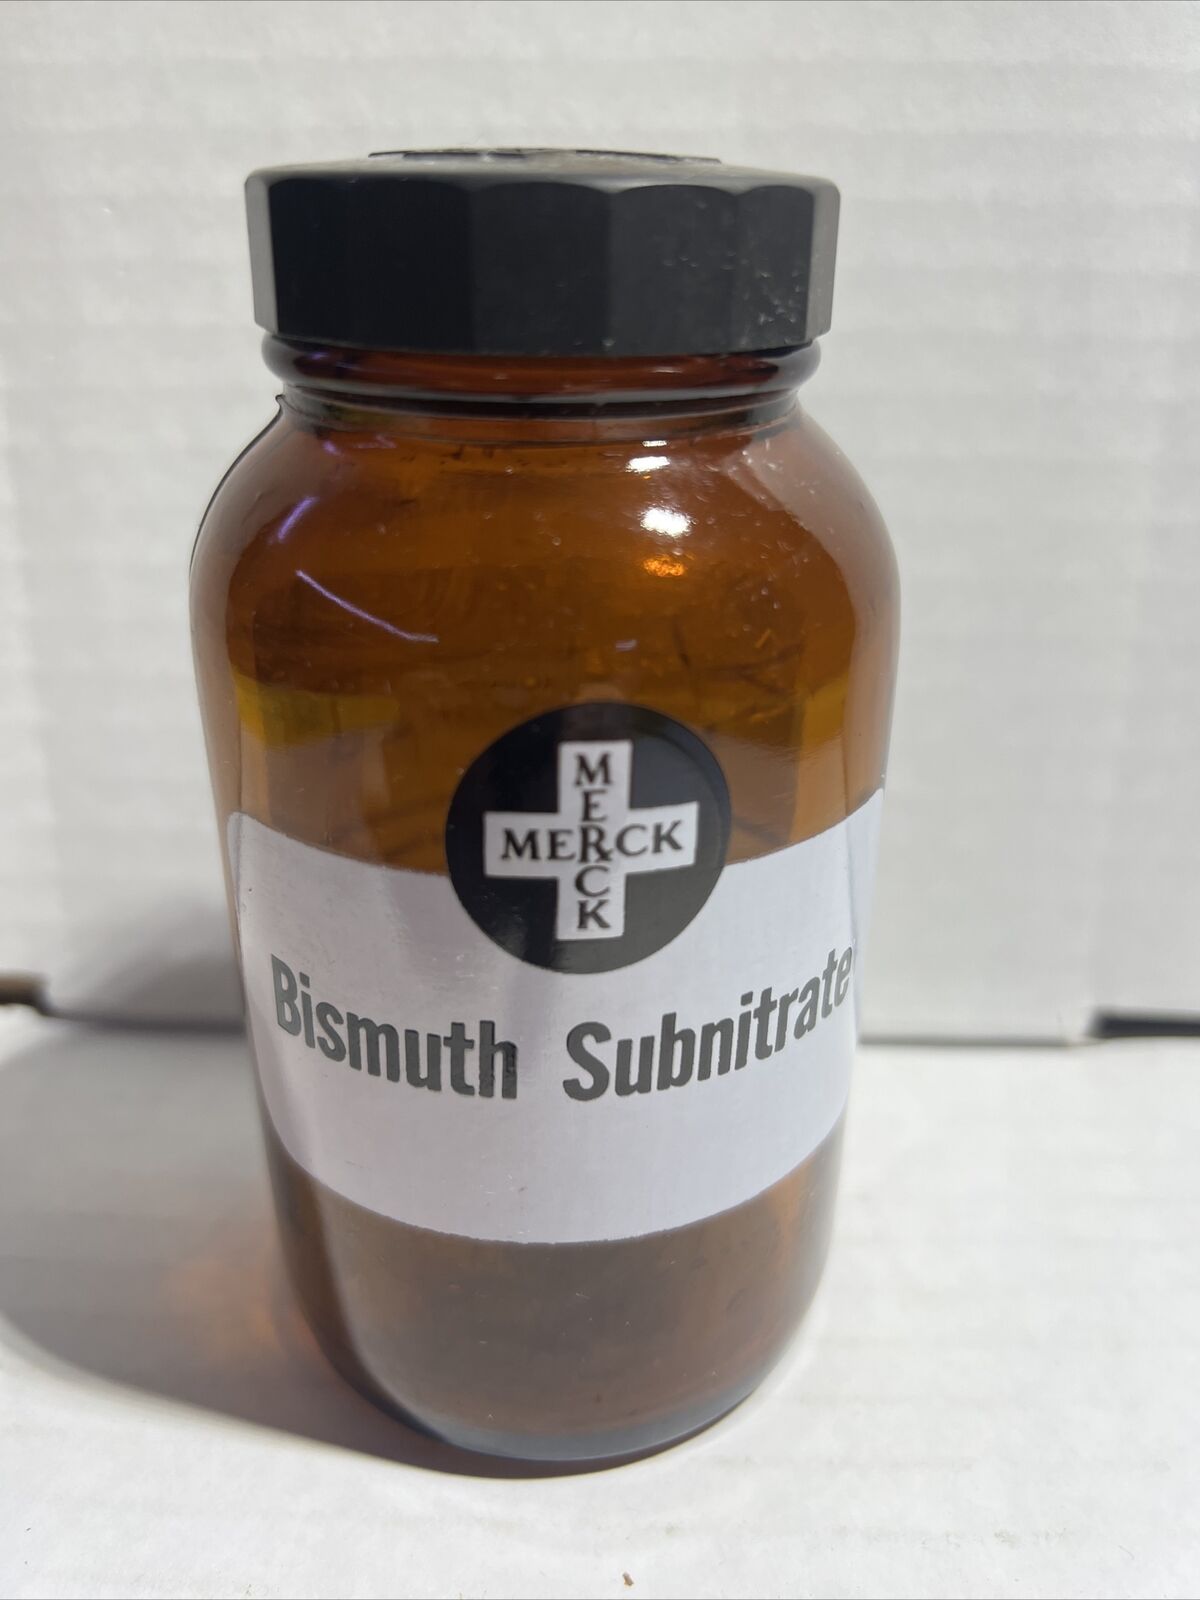 Vintage Merck & Co Bismuth Subnitrate Amber Maryland Glass Pharmaceutical Bottle